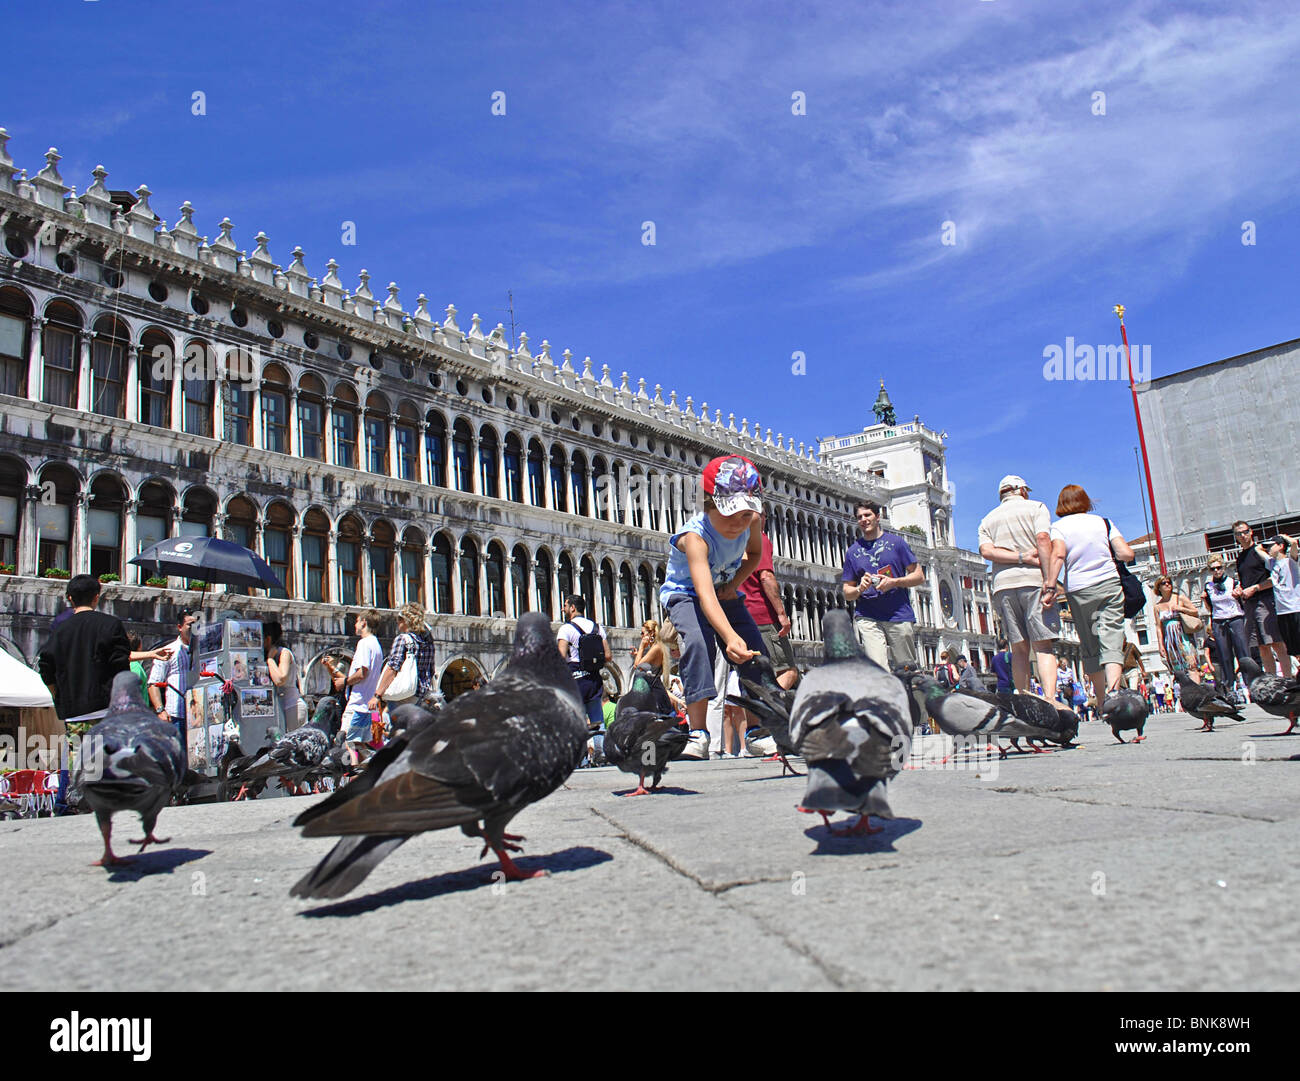 A boy feeds pigeons in St Marks Square, Venice, Italy Stock Photo